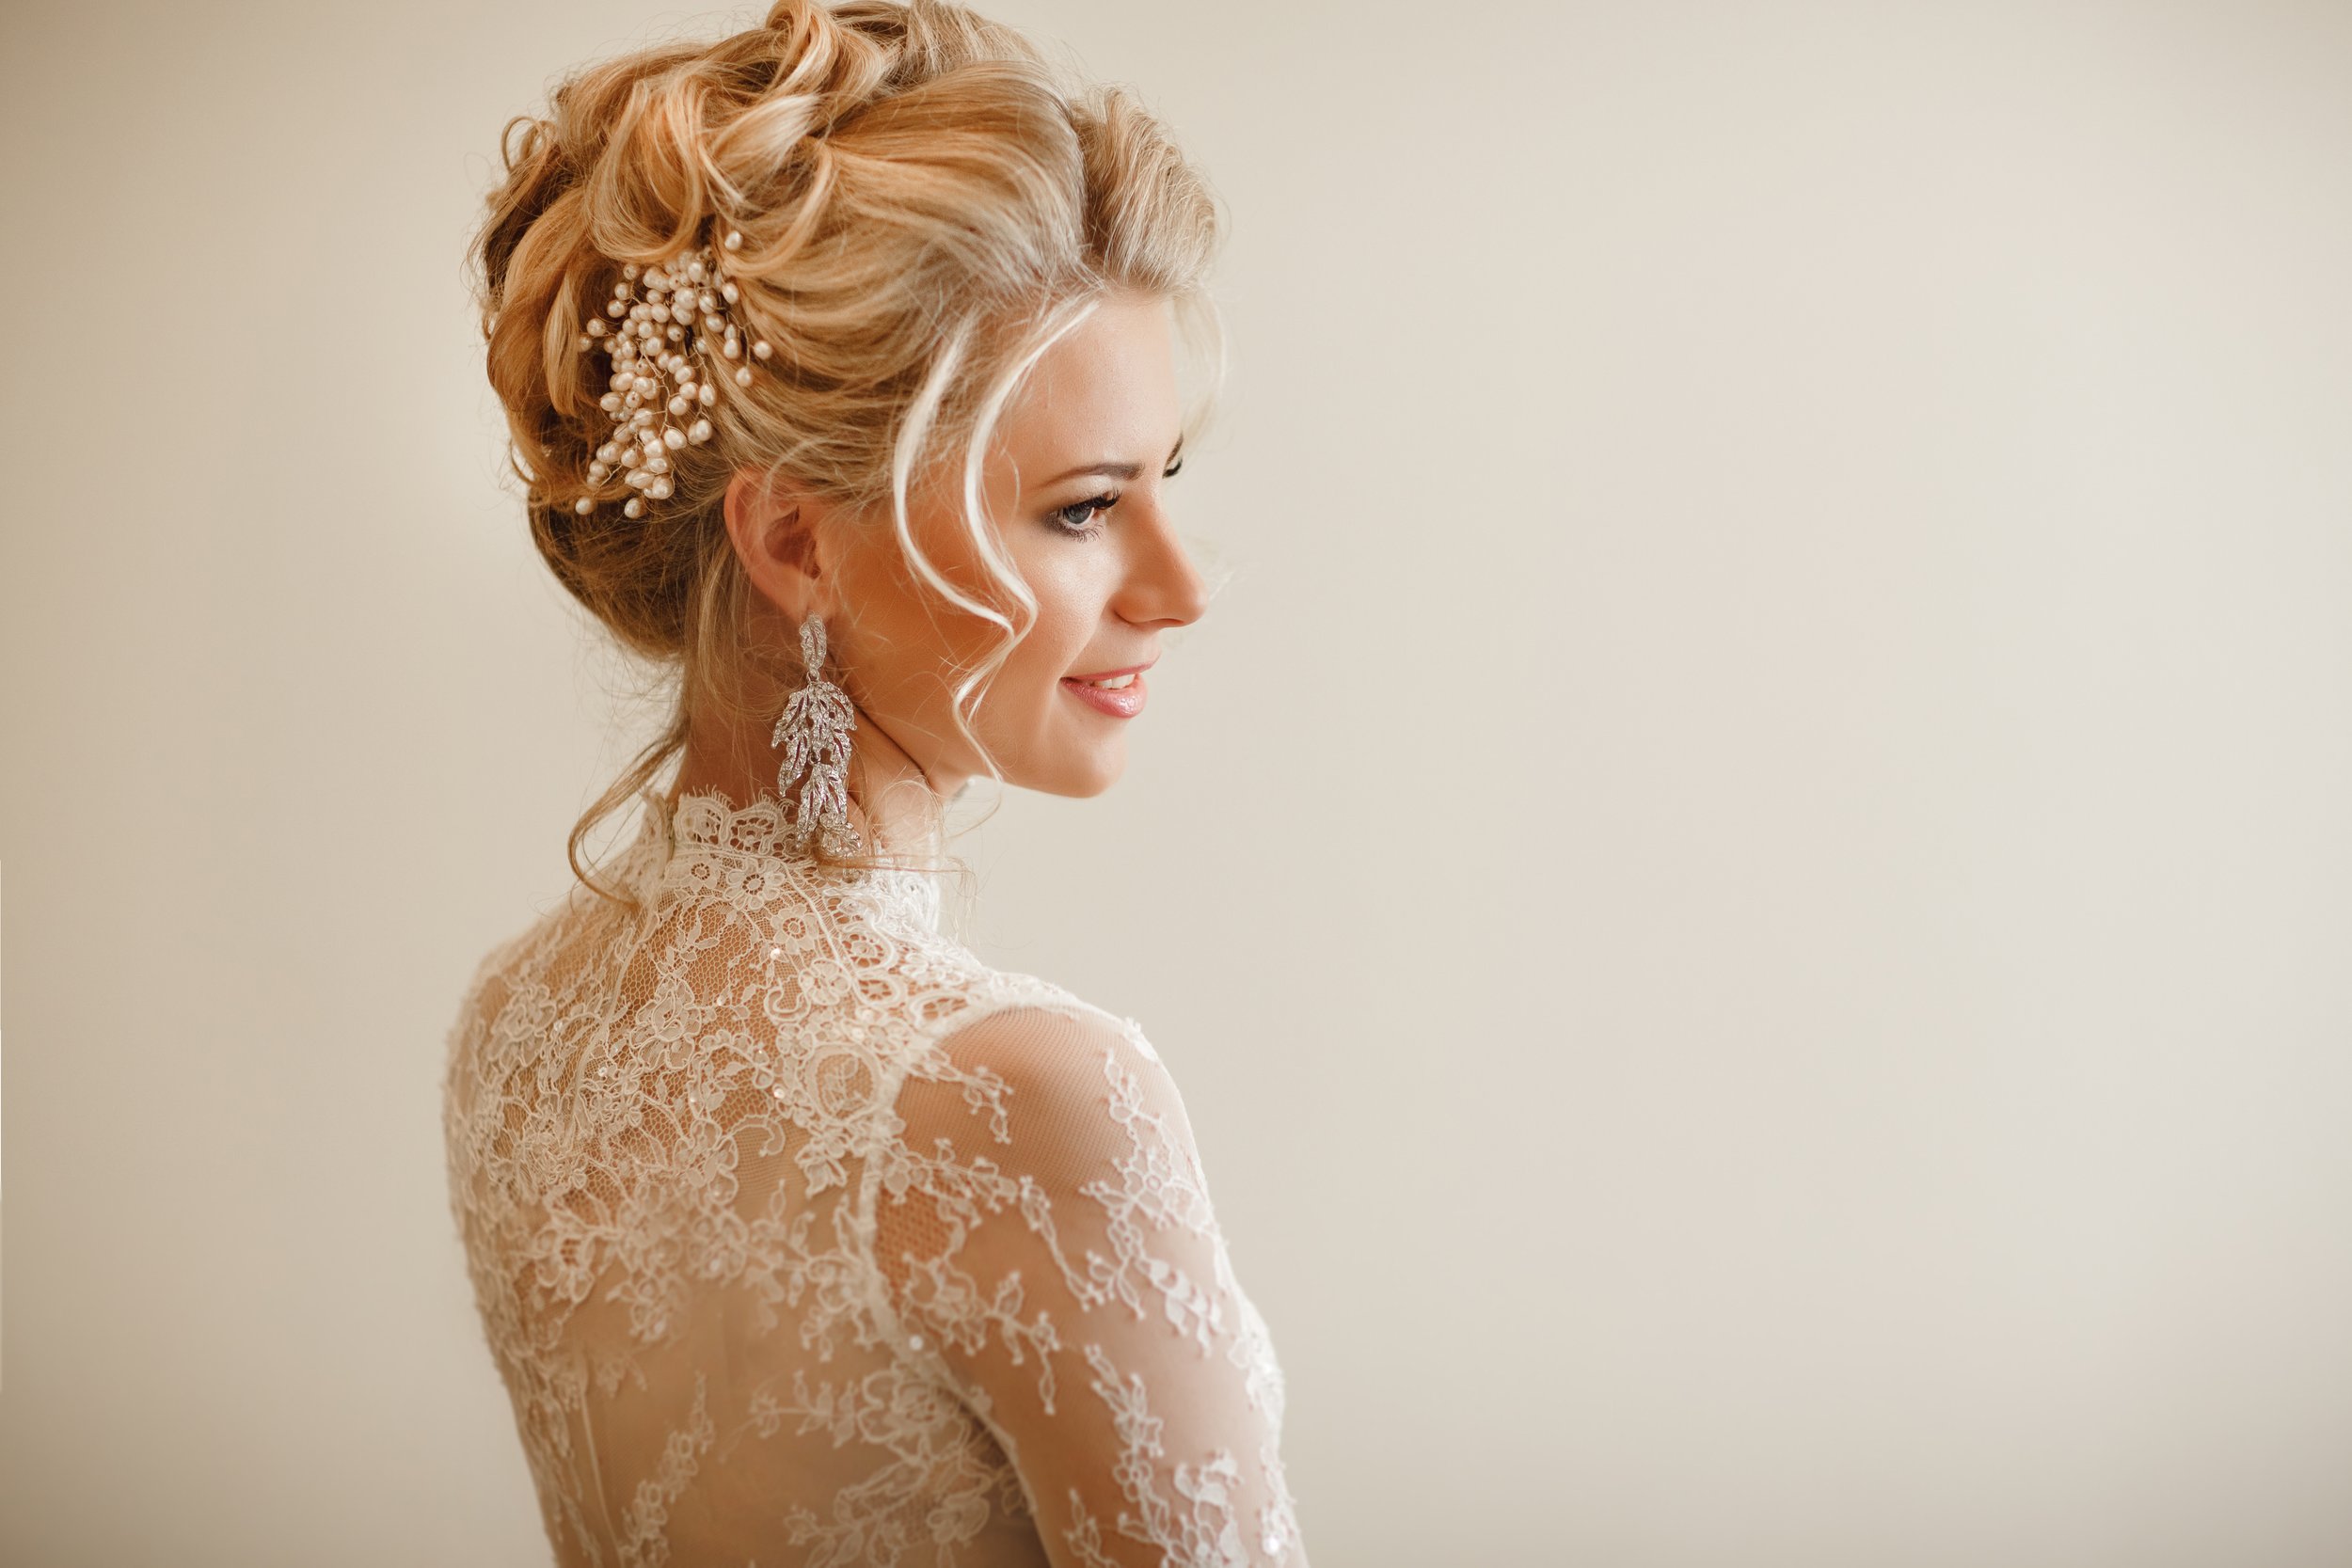 Amazing Wedding Hairstyles to Complement Your Wedding Dress